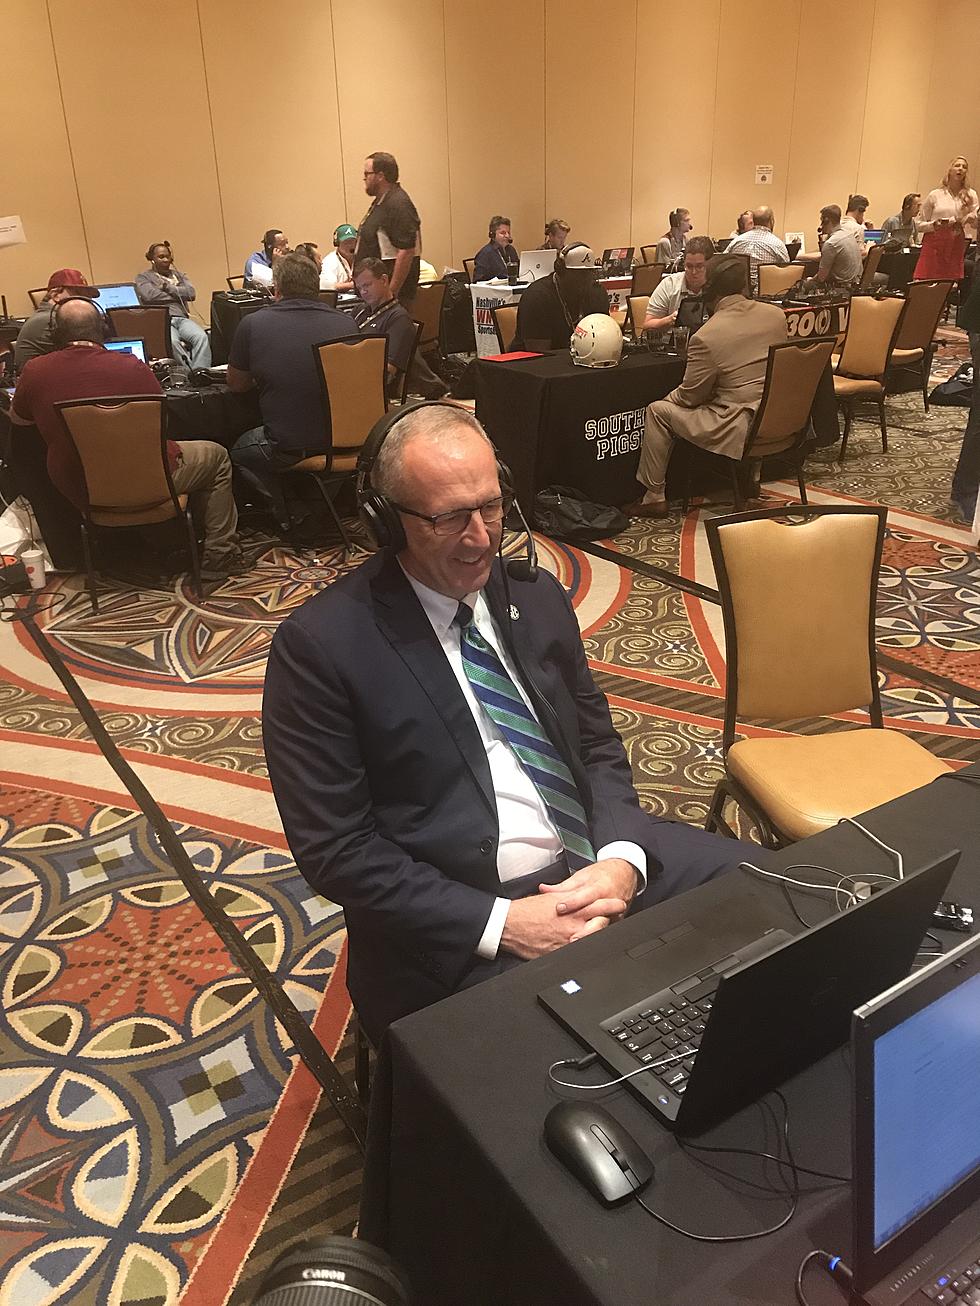 SEC Commissioner Greg Sankey Discusses the Growth of the Conference at SEC Media Days